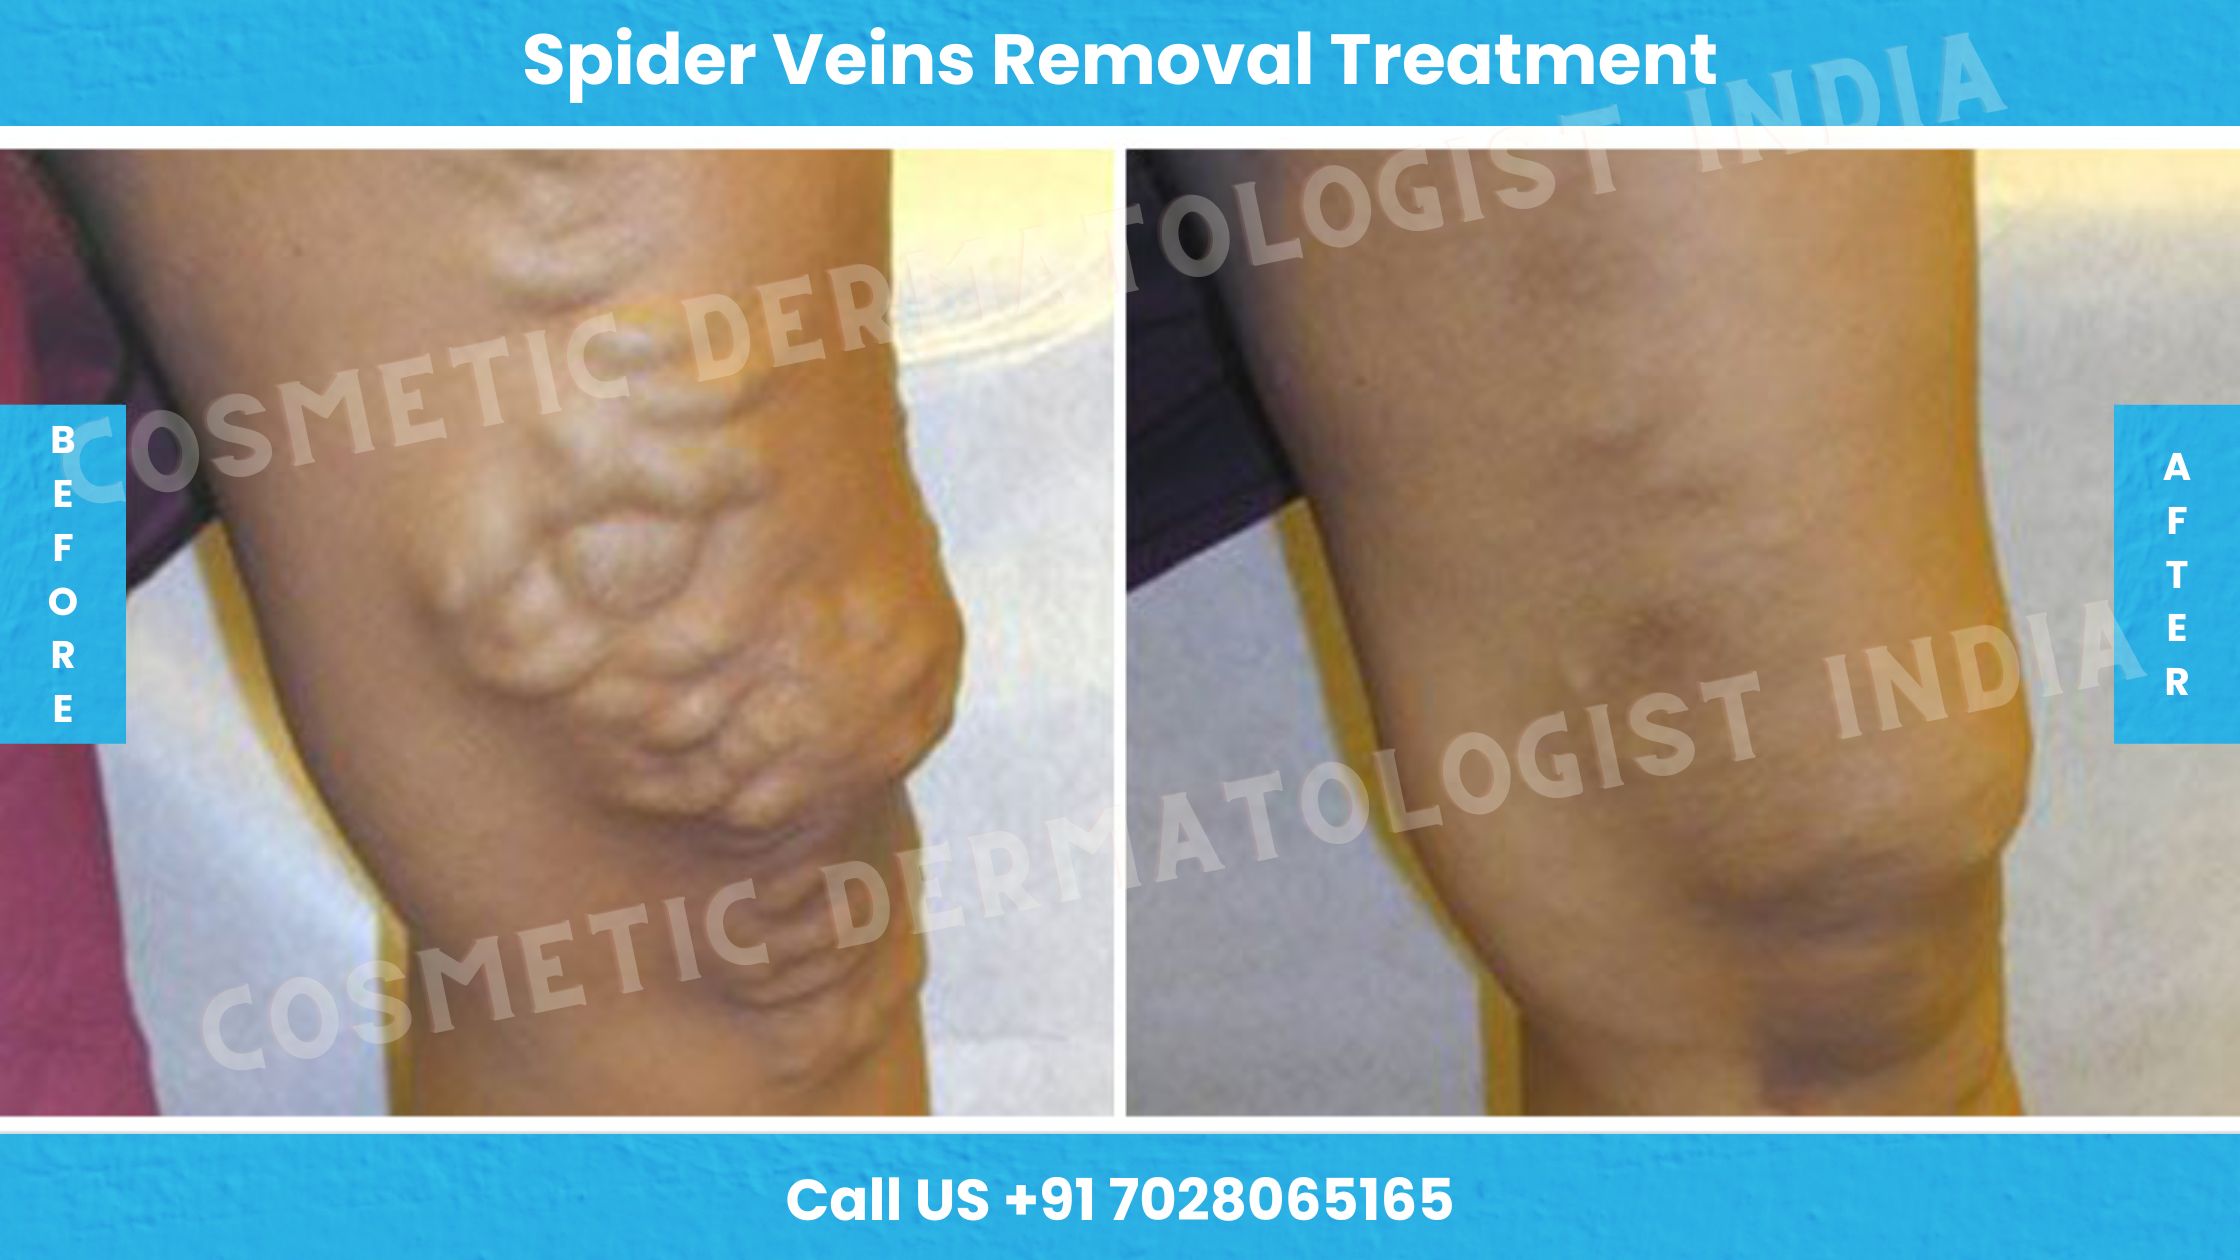 Before and After Images of Spider Veins Removal Treatment